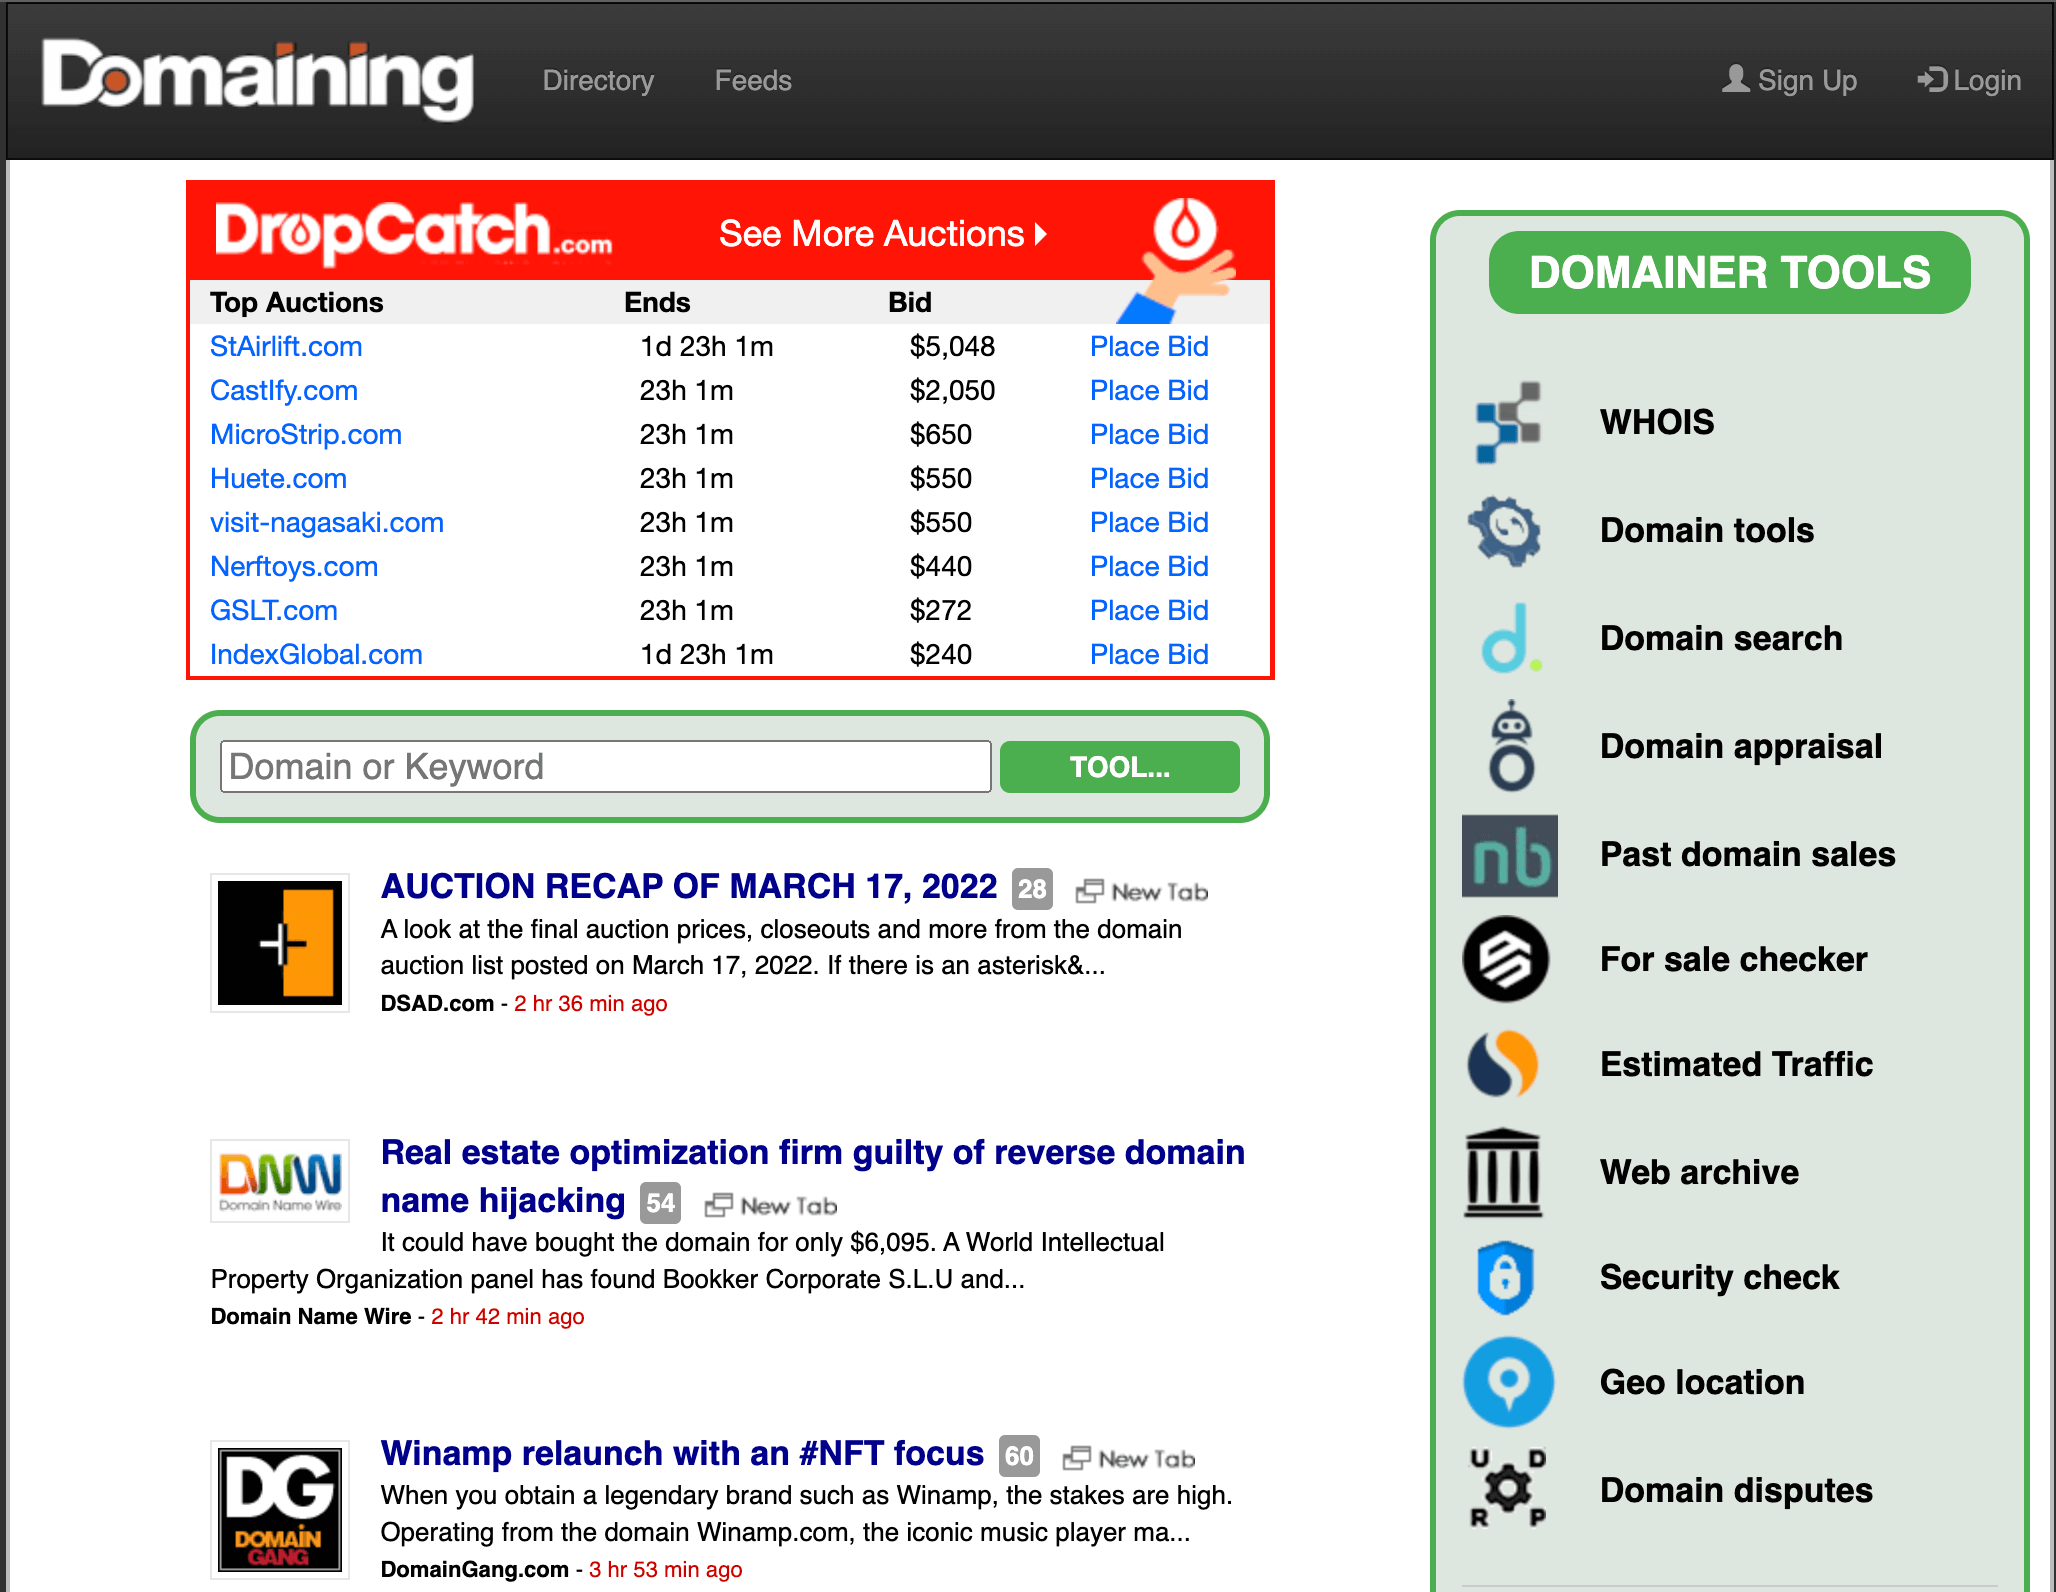 Domaining.com's home page